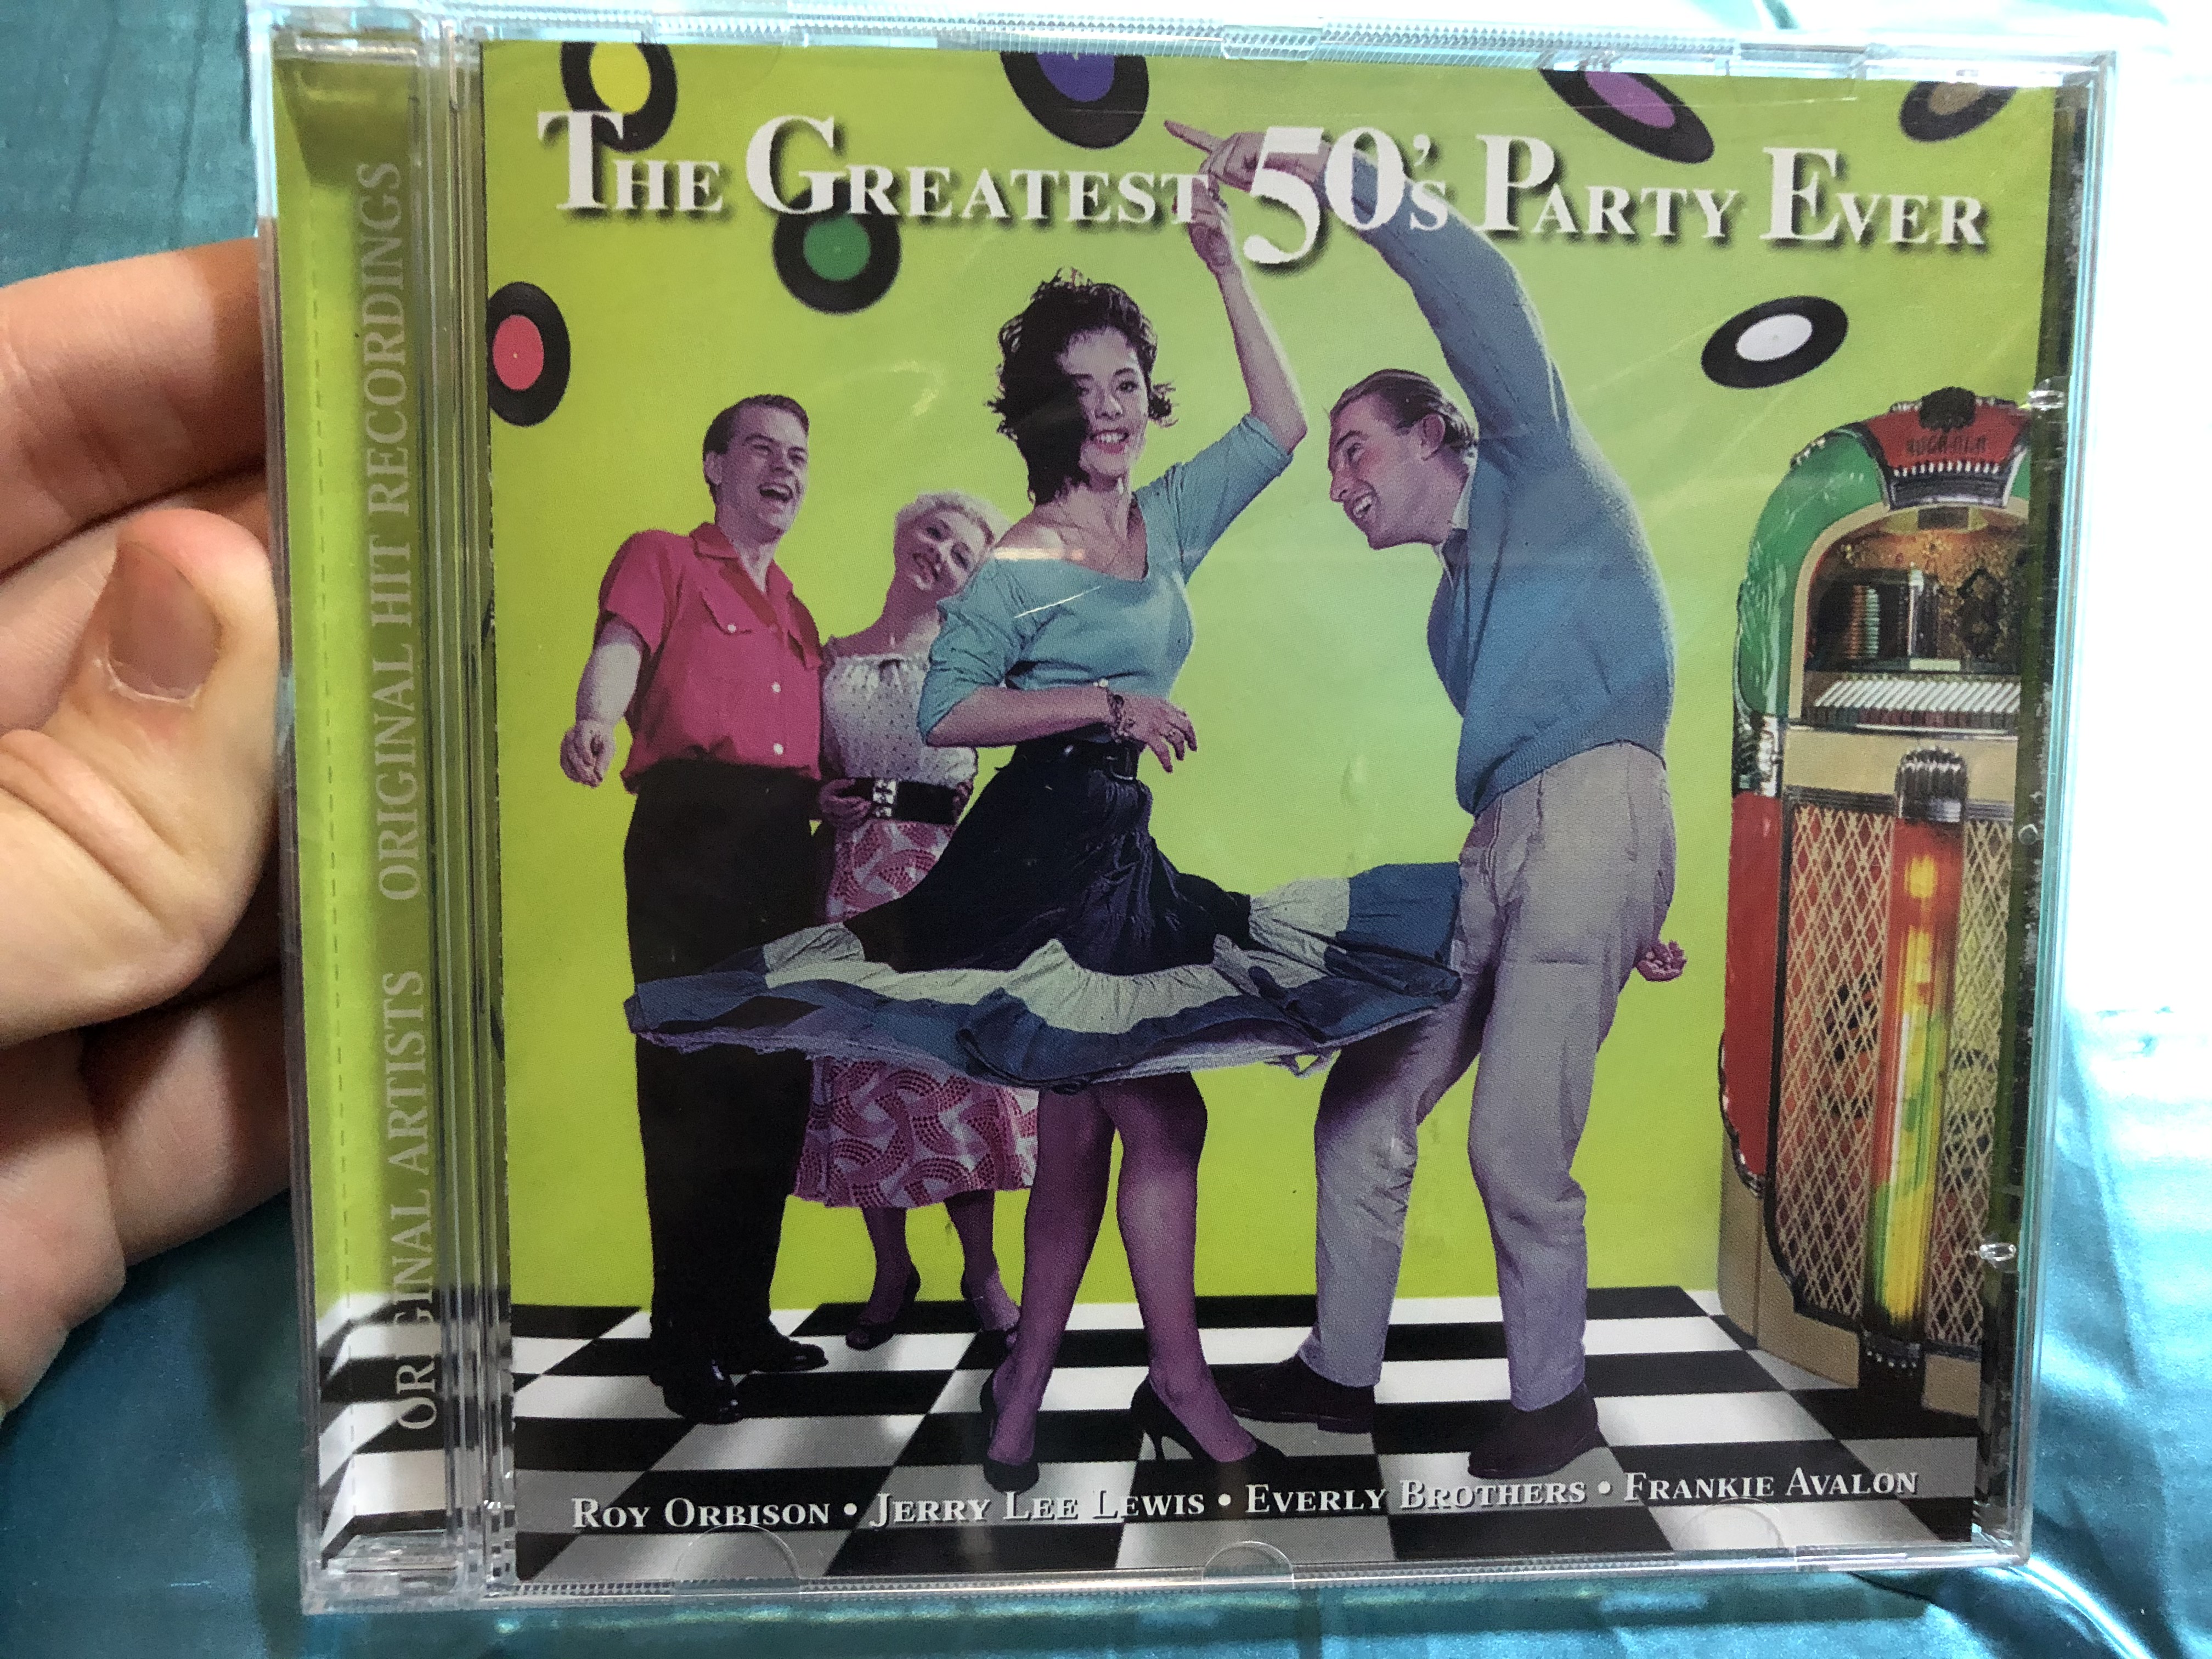 the-greatest-50-s-party-ever-roy-orbison-jerry-lee-lewis-everly-brothers-frankie-avalon-bellevue-entertainment-audio-cd-4016-2-1-.jpg